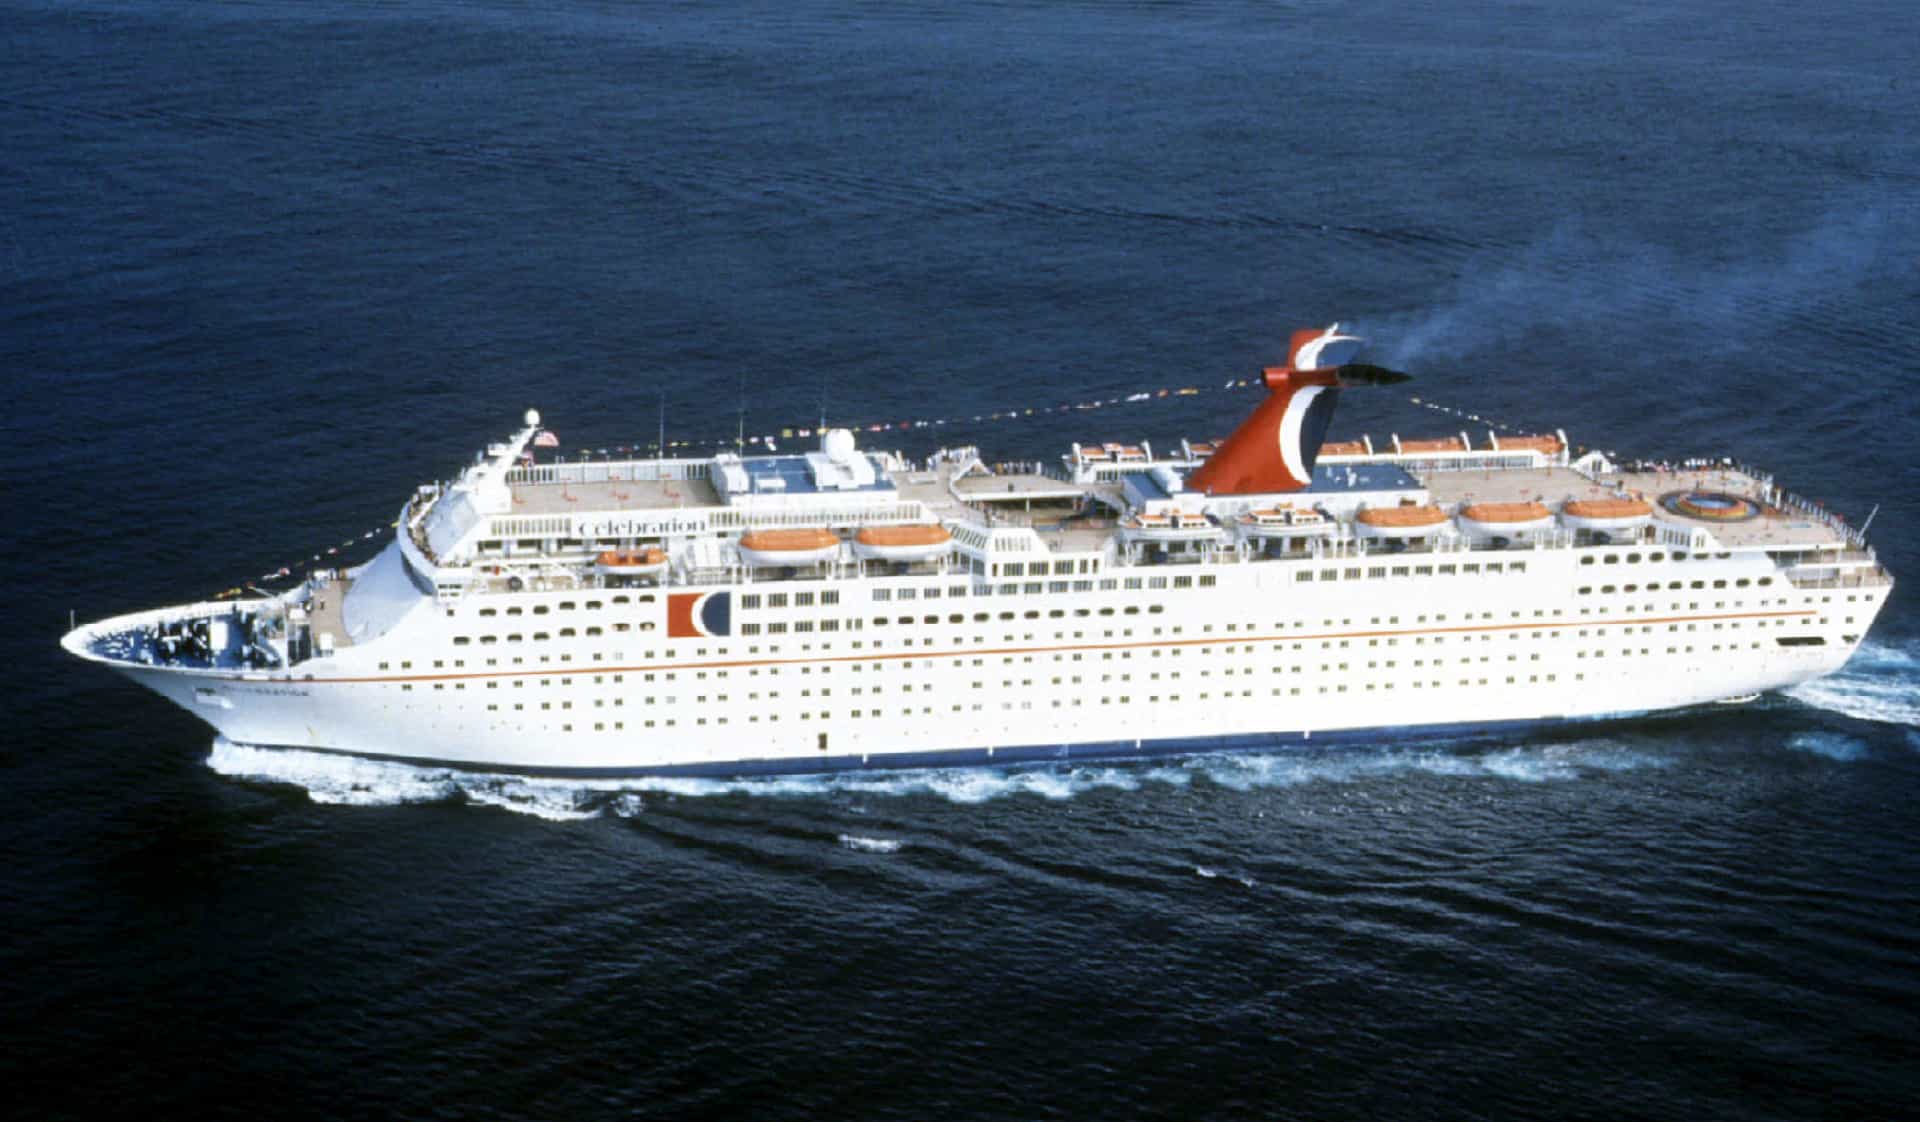 <p>Luke Renner, a 22-year-old autistic passenger aboard the Carnival Fantasy, is believed to have gone overboard on December 16, 2018. The Mexican navy put out a search for him.</p>